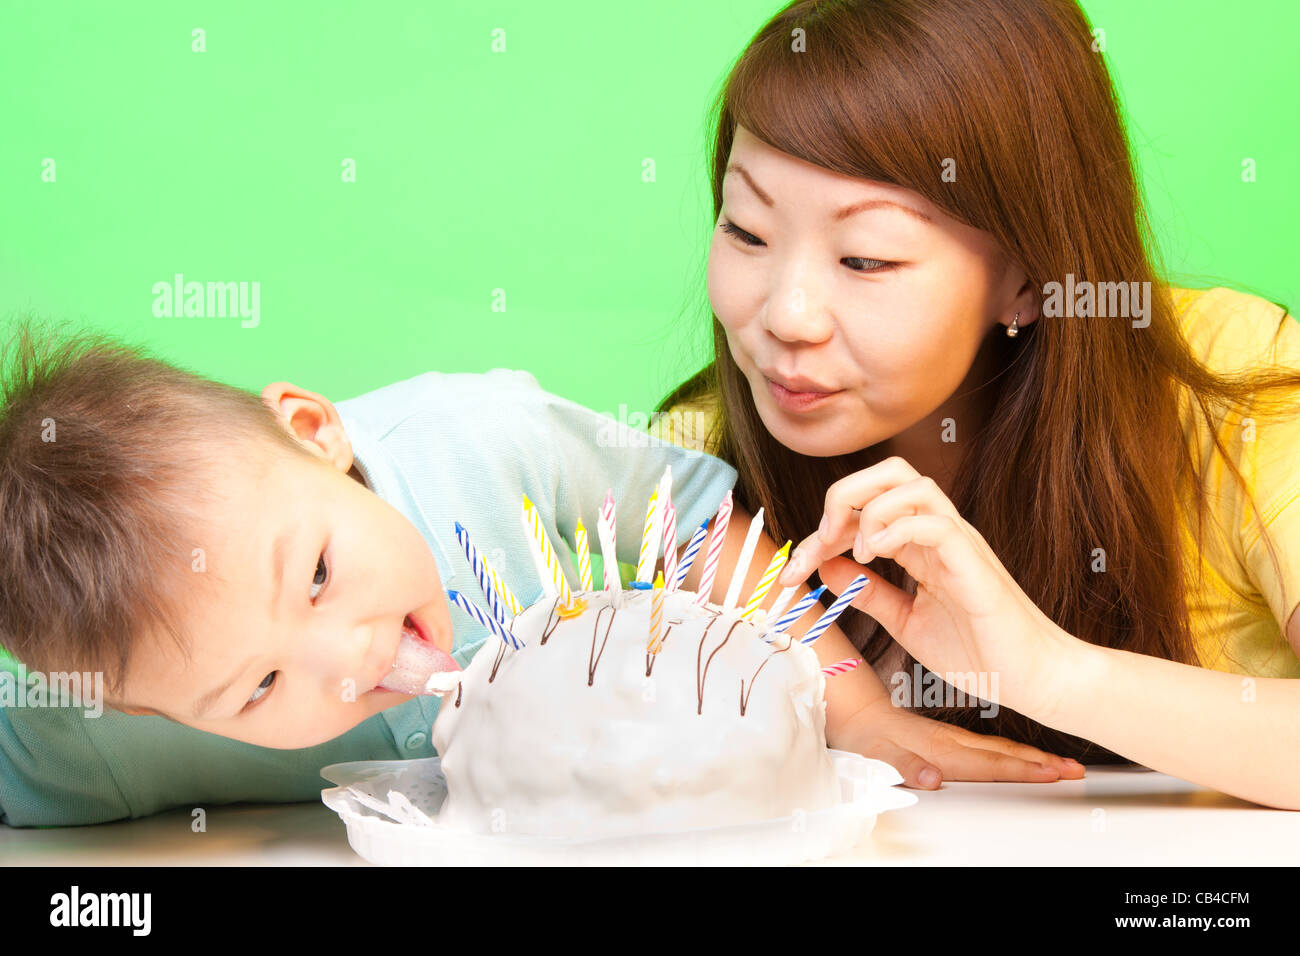 Boy licks his birthday cake with mother nearby and a lot of candles in it Stock Photo